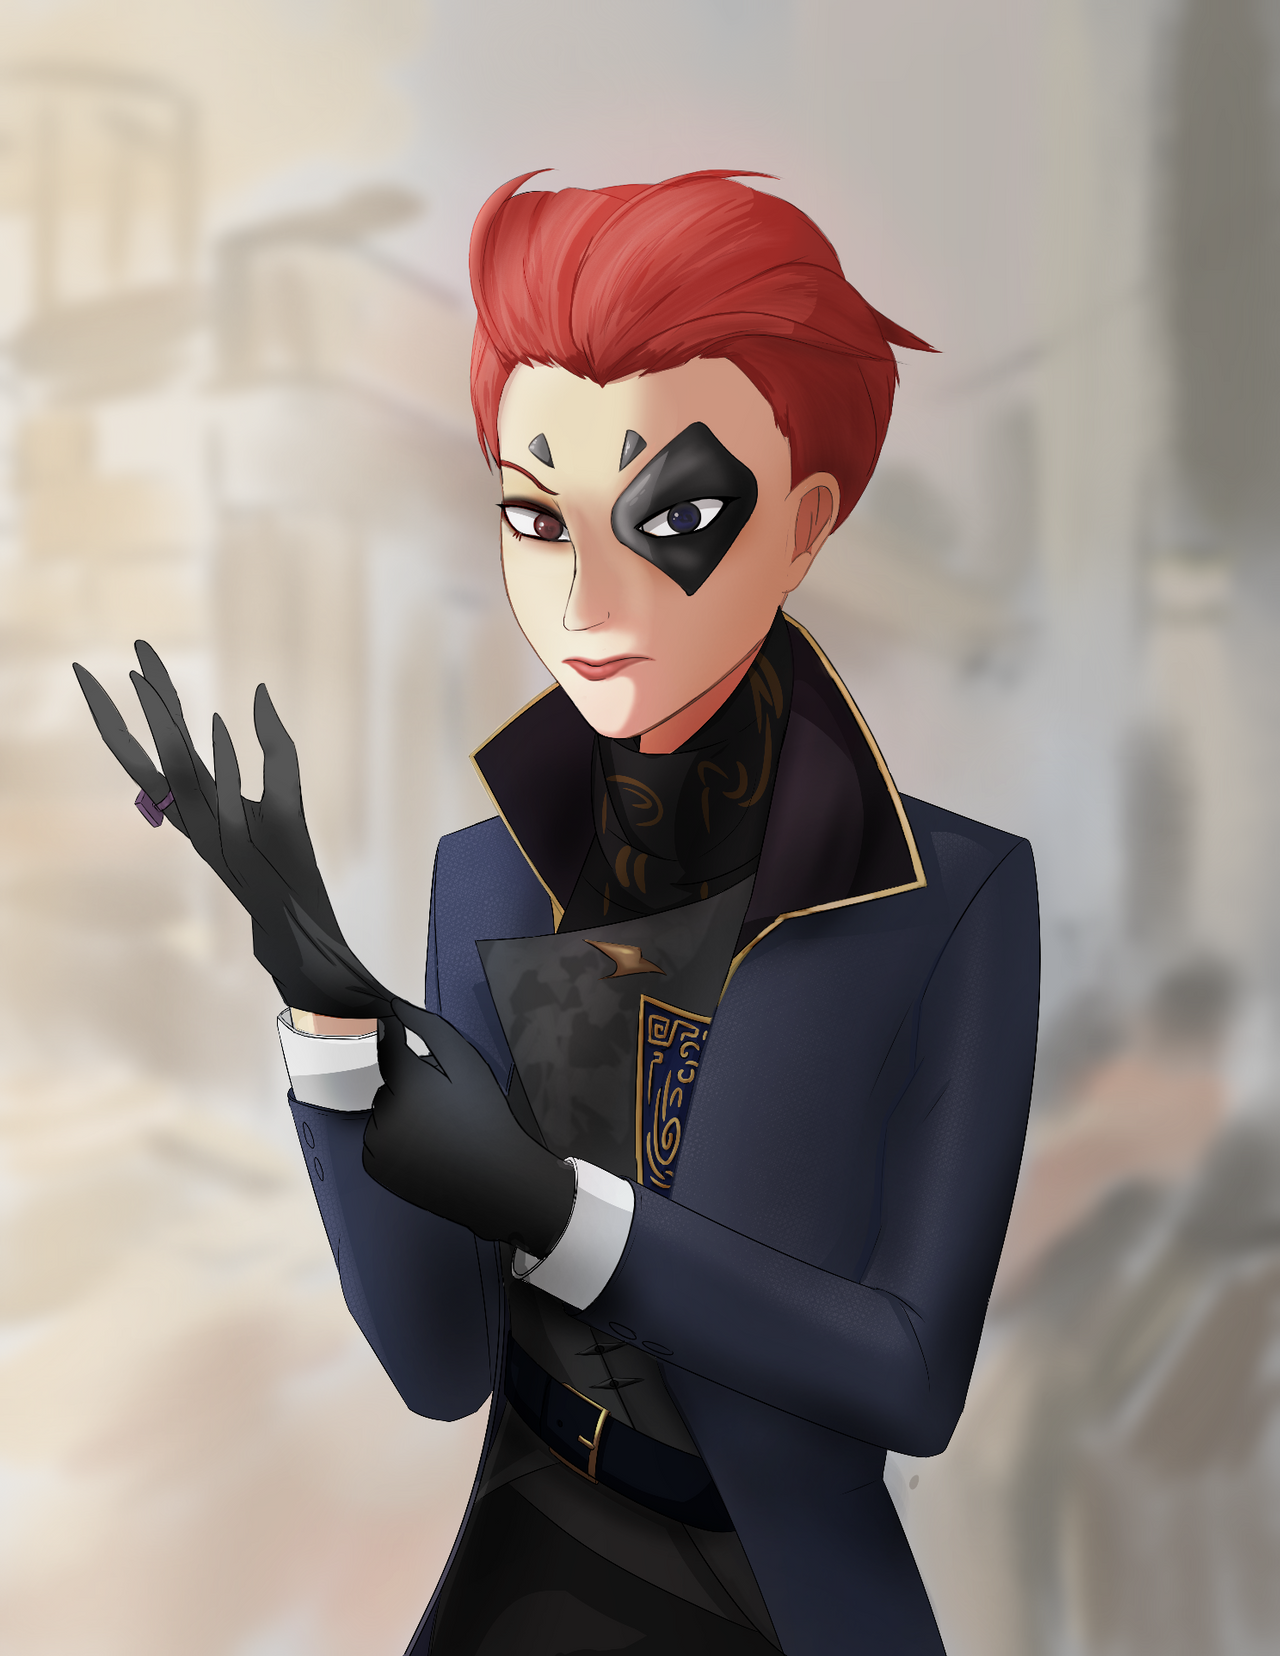 Moira Kaldwin (Overwatch + Dishonored) by brown-nii on DeviantArt